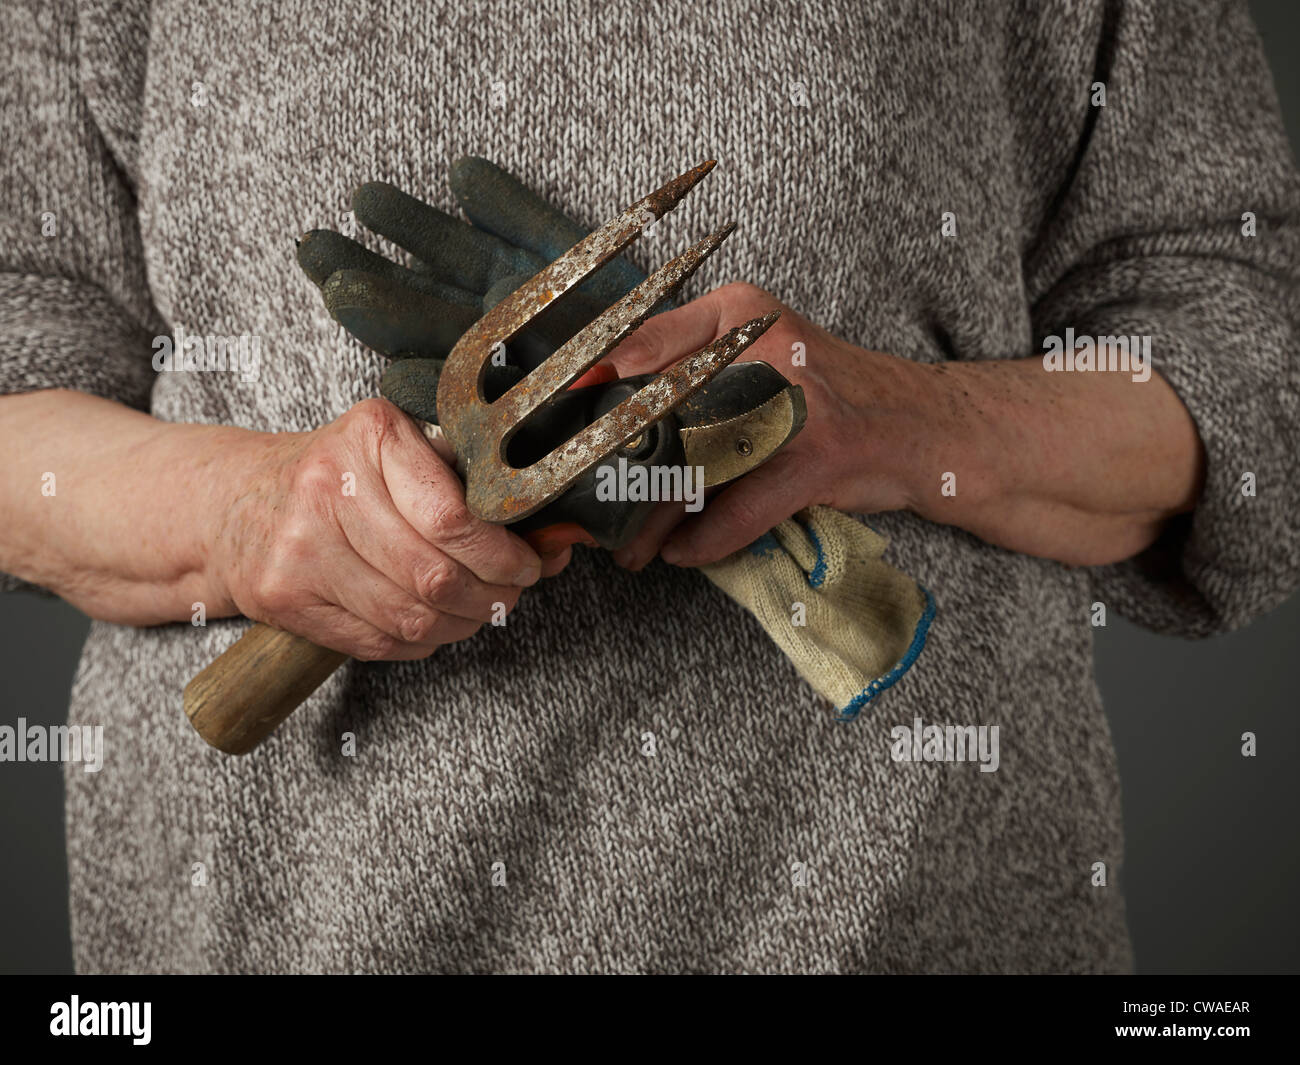 Woman holding gardening glove and trowel Stock Photo